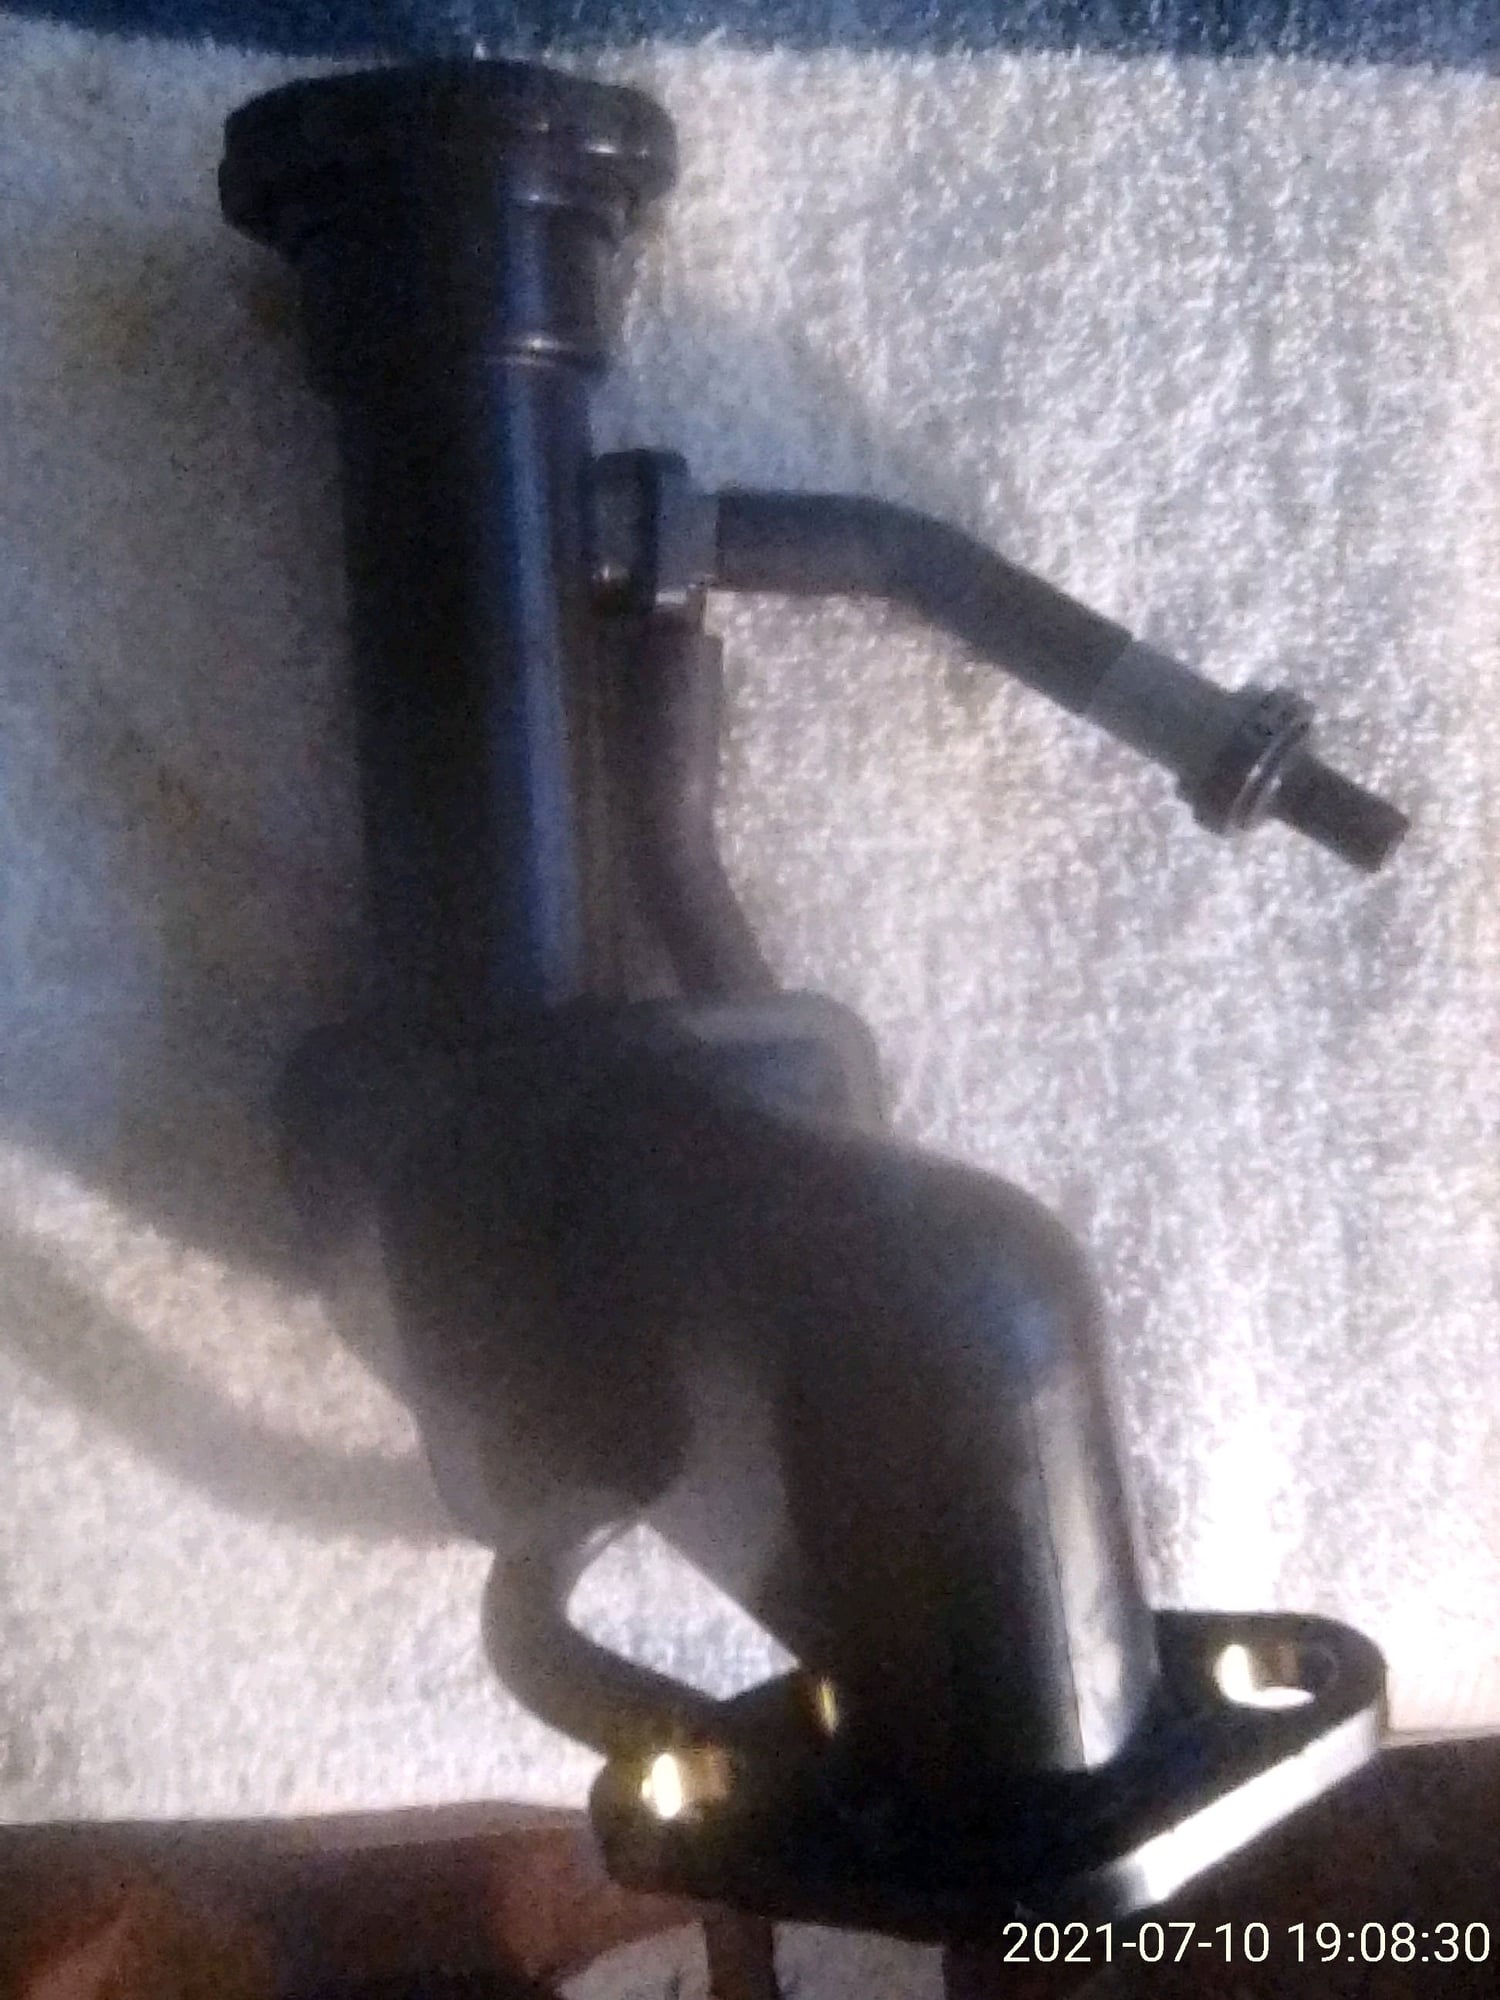 Miscellaneous - FD OEM Oil Filler Neck Assembly - Used - 1993 to 1995 Mazda RX-7 - San Jose, CA 95121, United States